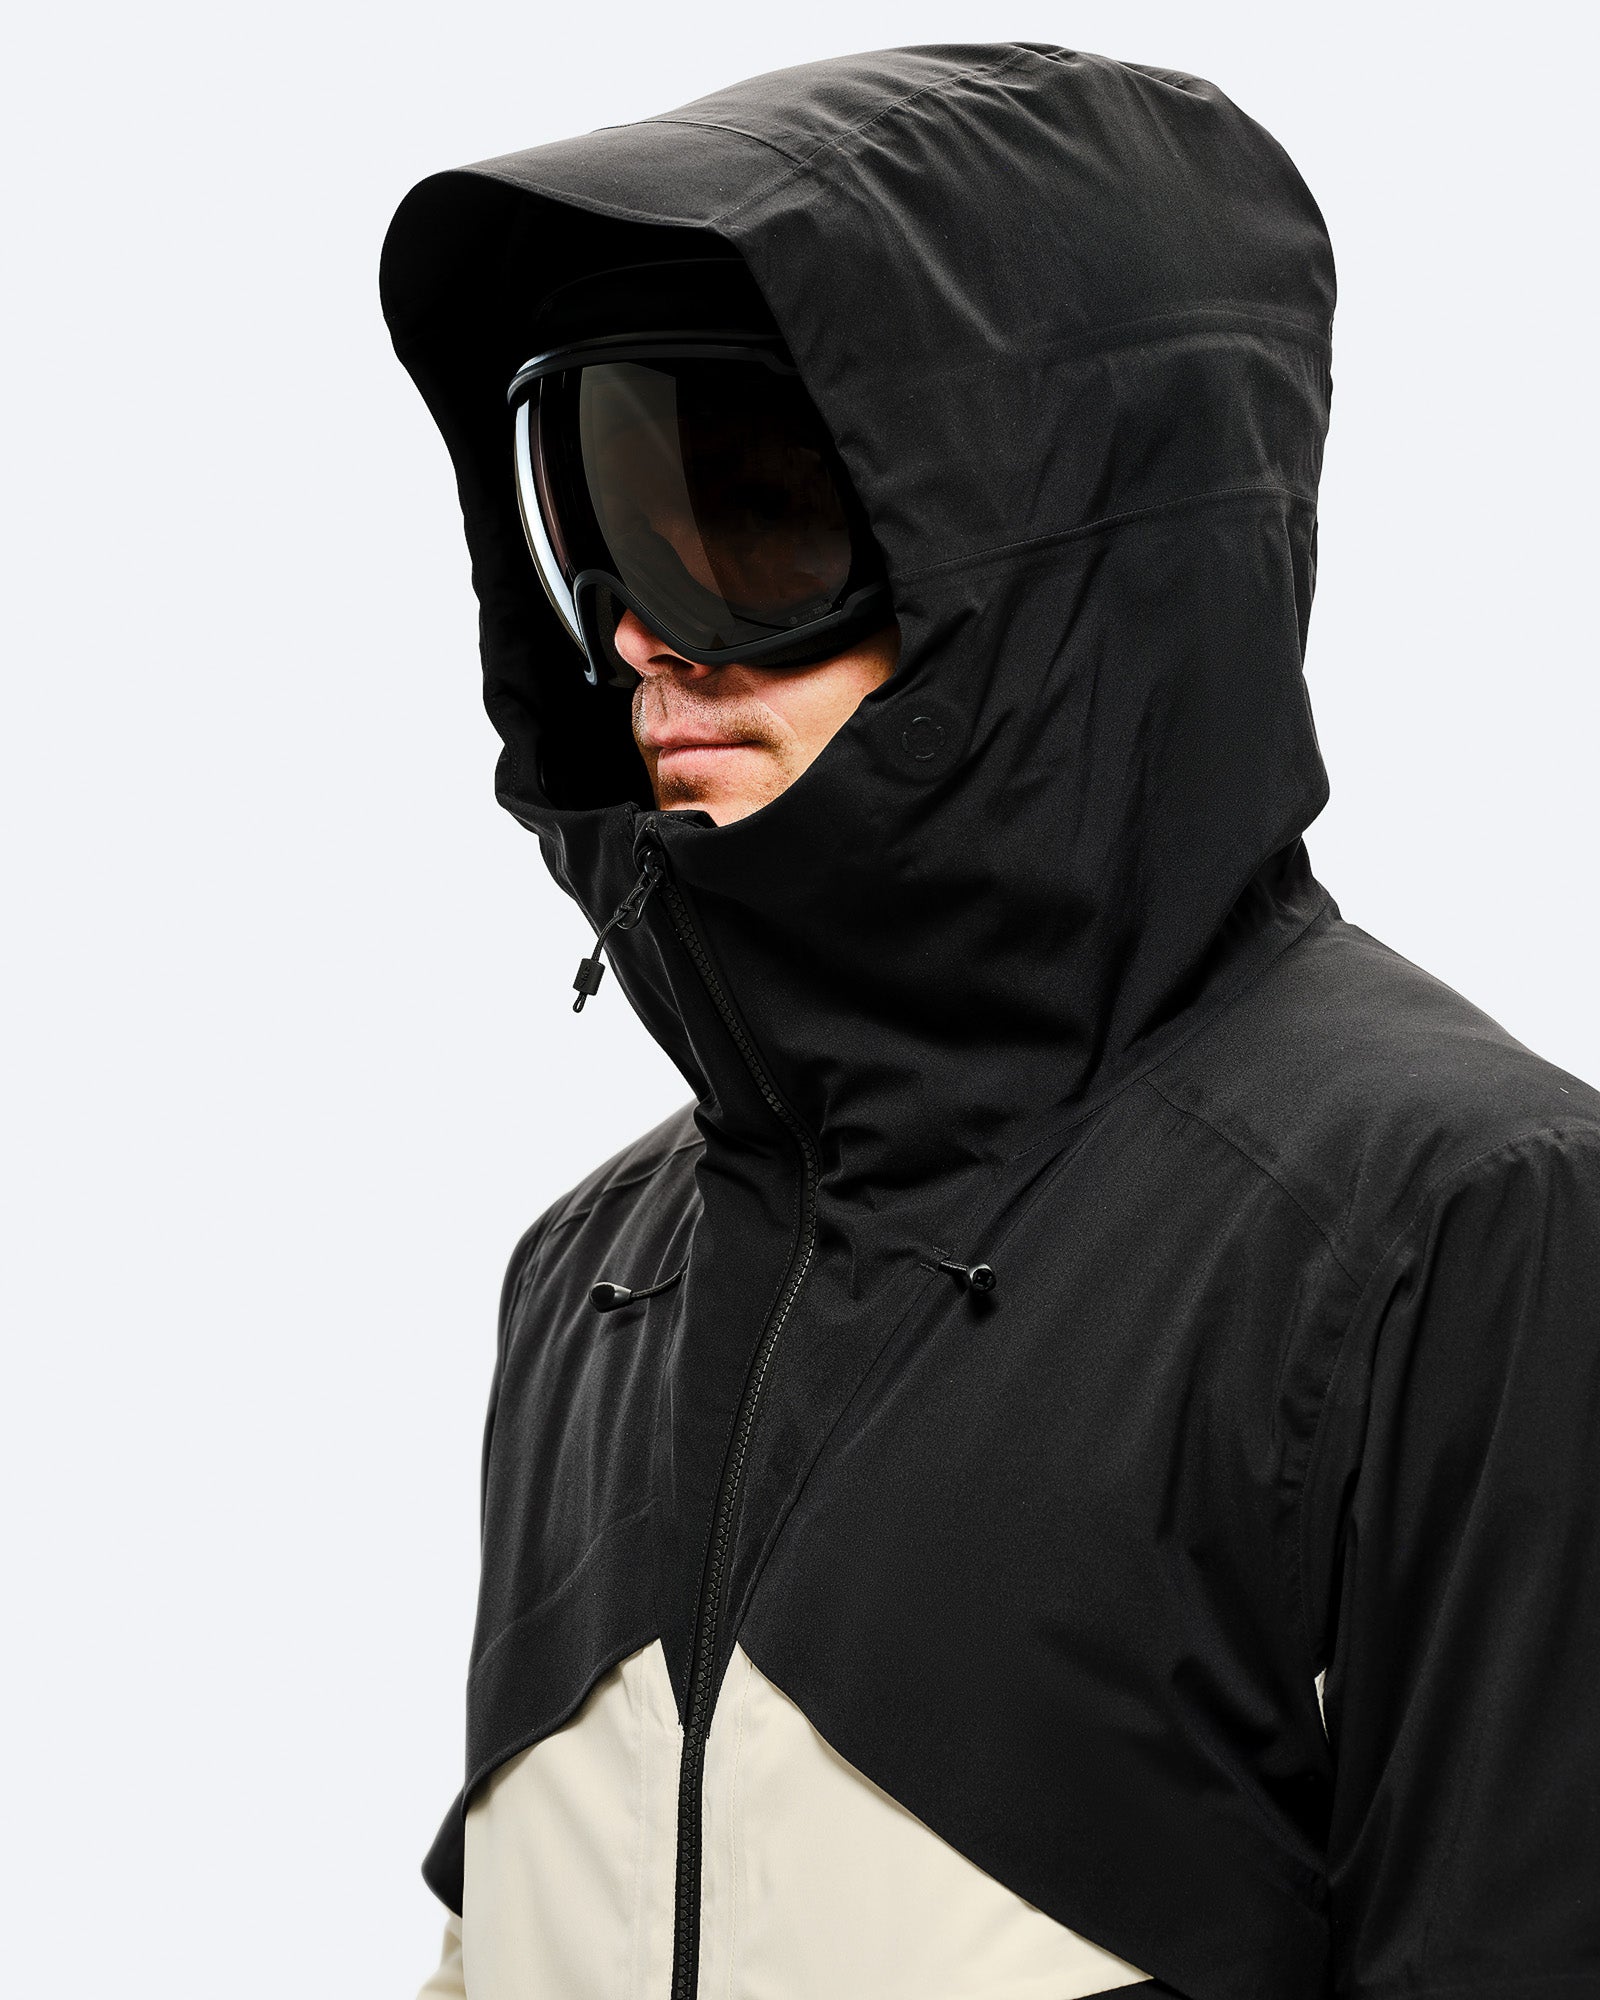 Adjustable, helmet compatible hood with laminated visor for optimal visibility in bad conditions card image